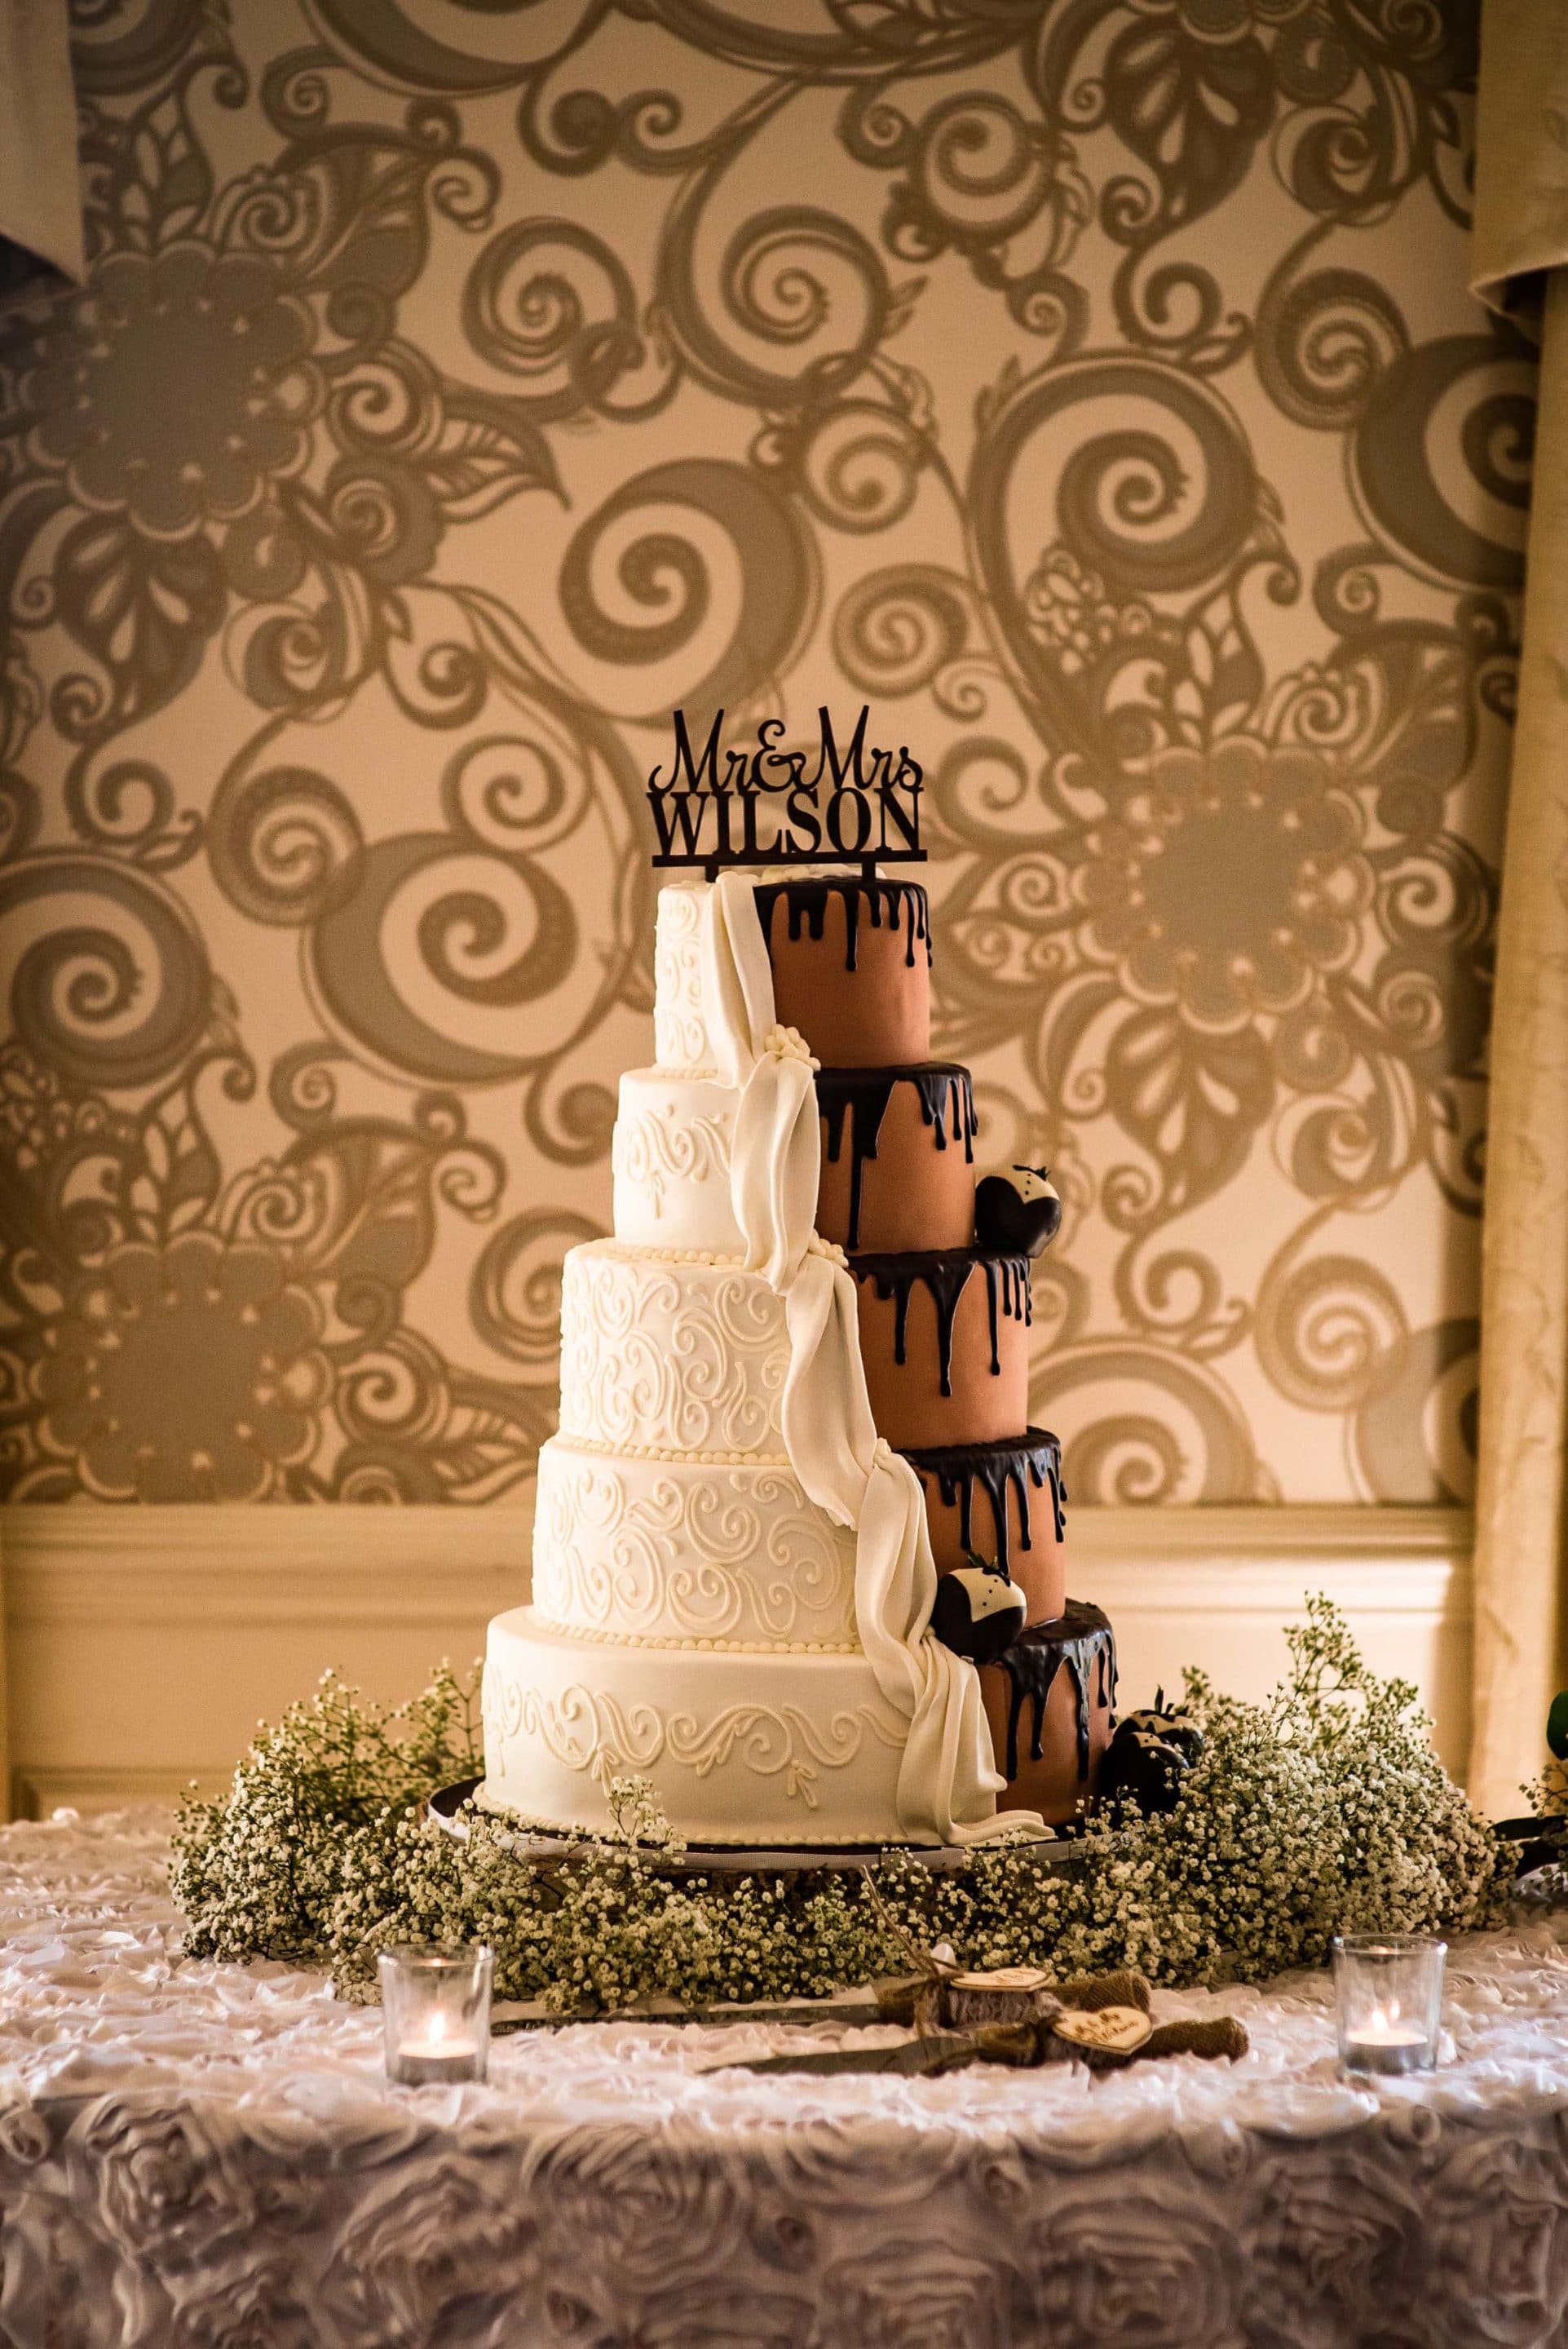 Five layer wedding cake with half white icing and half chocolate icing.